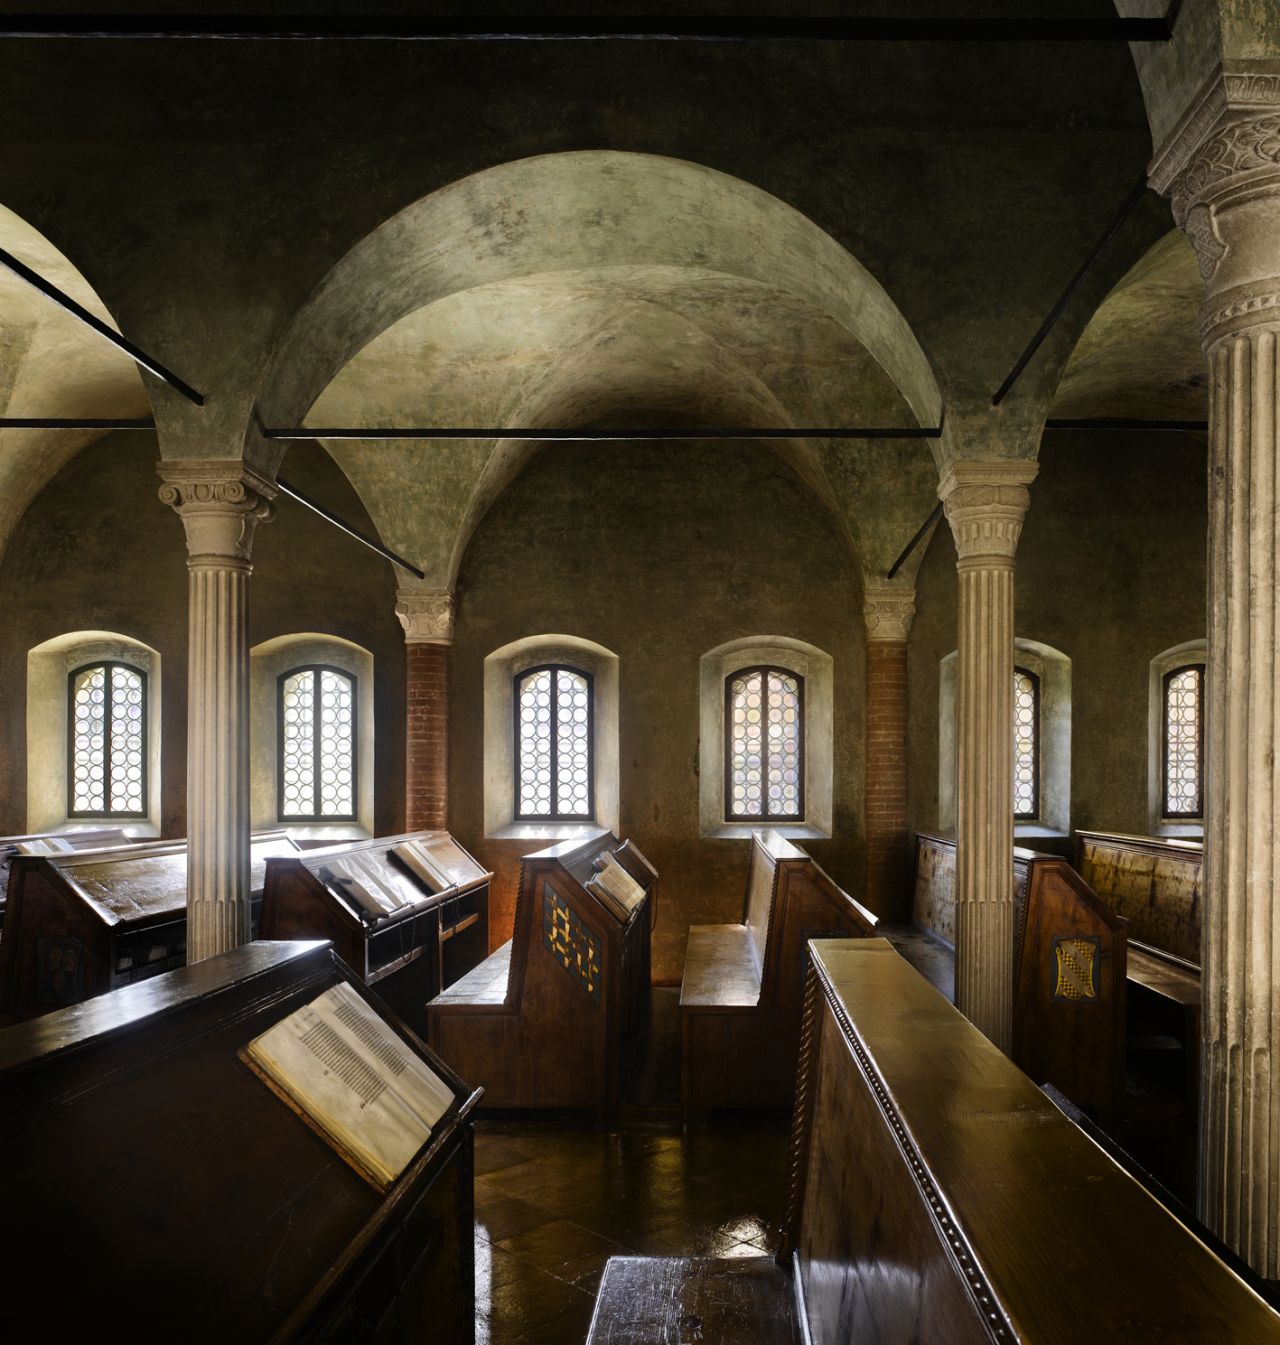 <br /><br /><strong>James Campbe</strong>ll: "This is the closest you can get to what a medieval library looked like. It was built for Malatesta Novello, a member of a prominent Italian aristocratic family, and it still contains original books, in their original places."